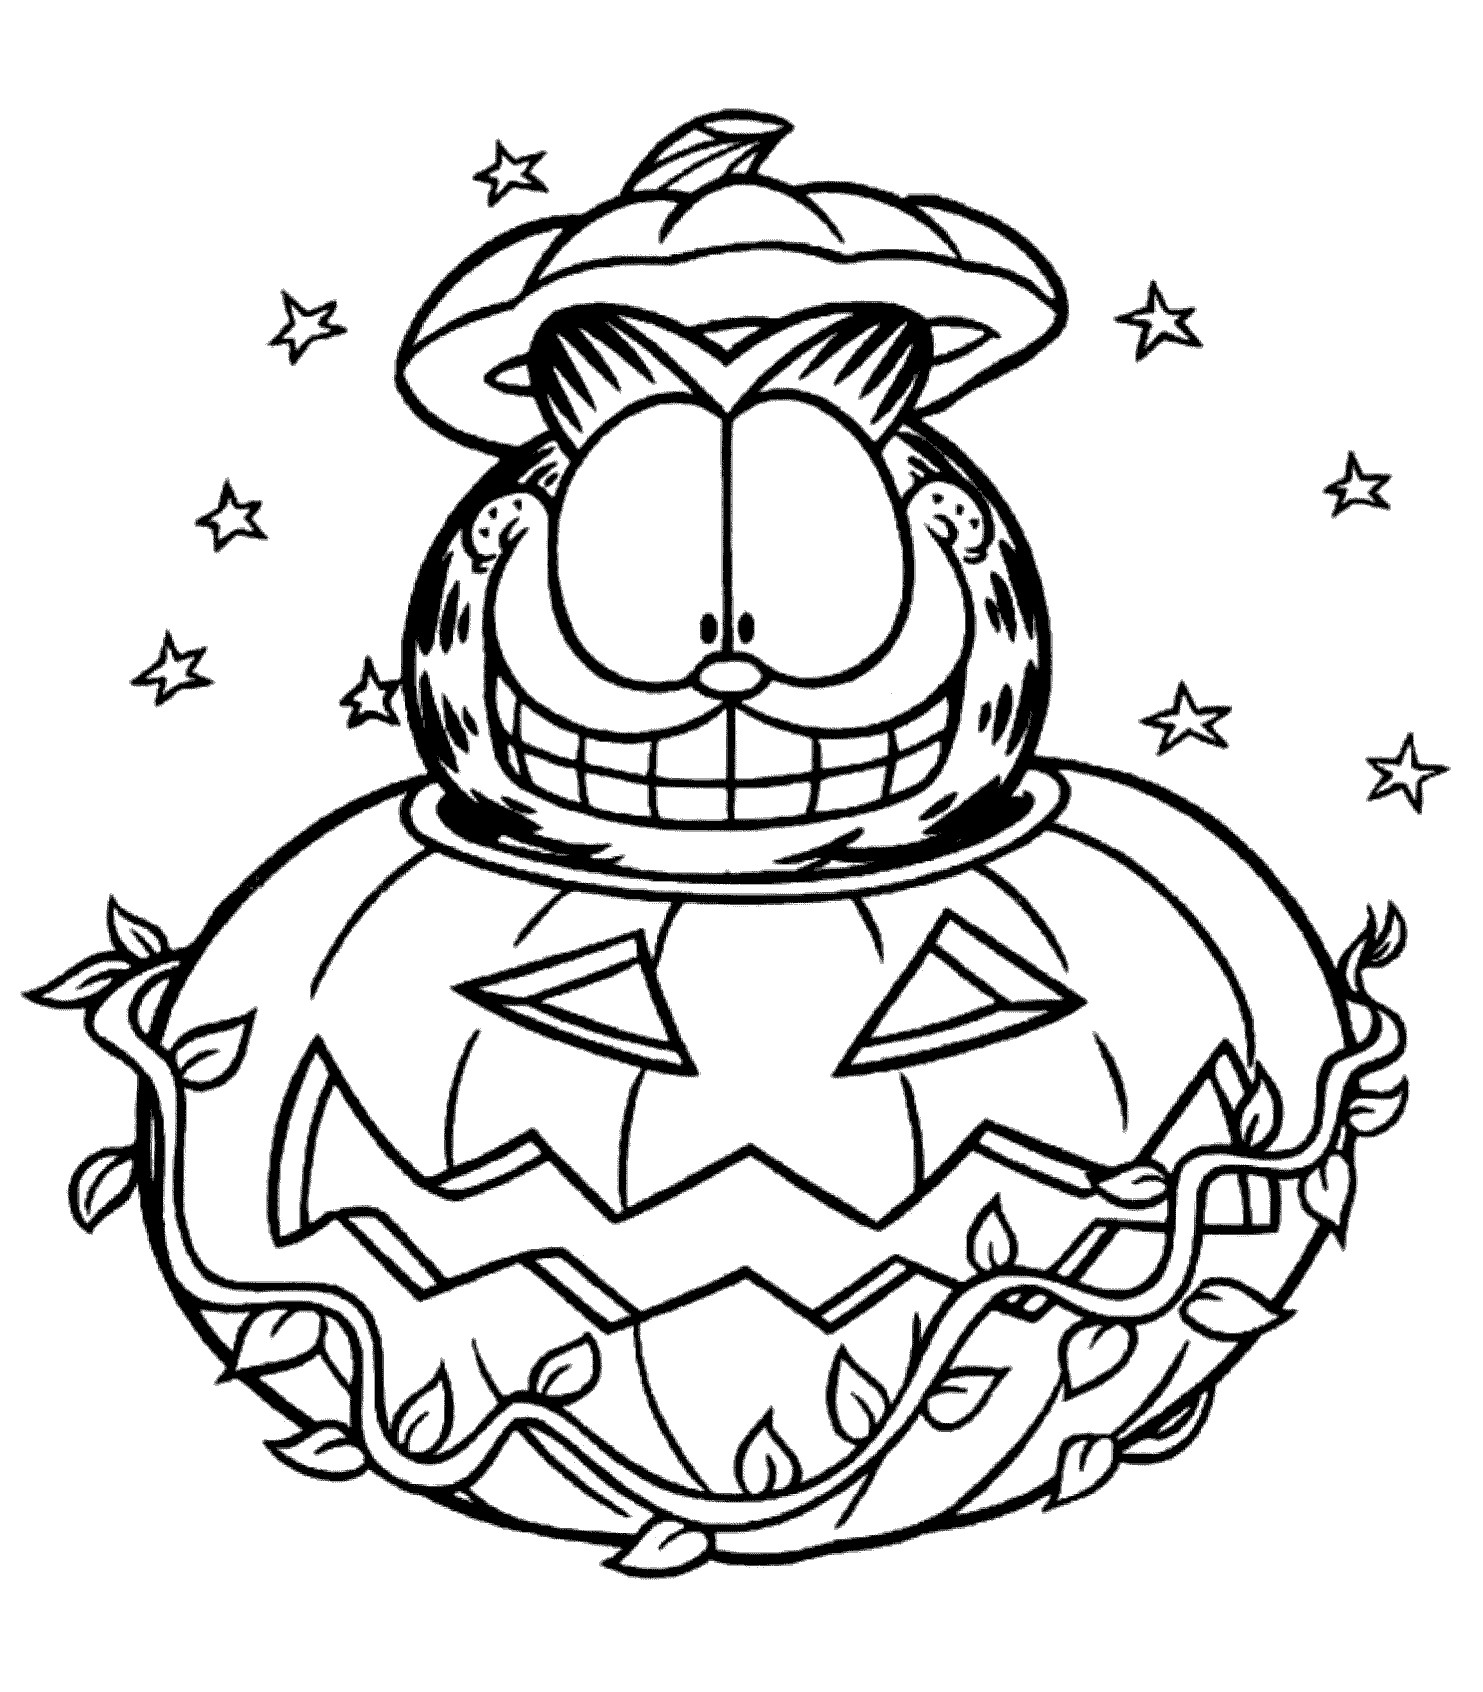 Halloween Coloring Pages For Kids Free
 Garfield Halloween Coloring Pages For Kids Printable Free